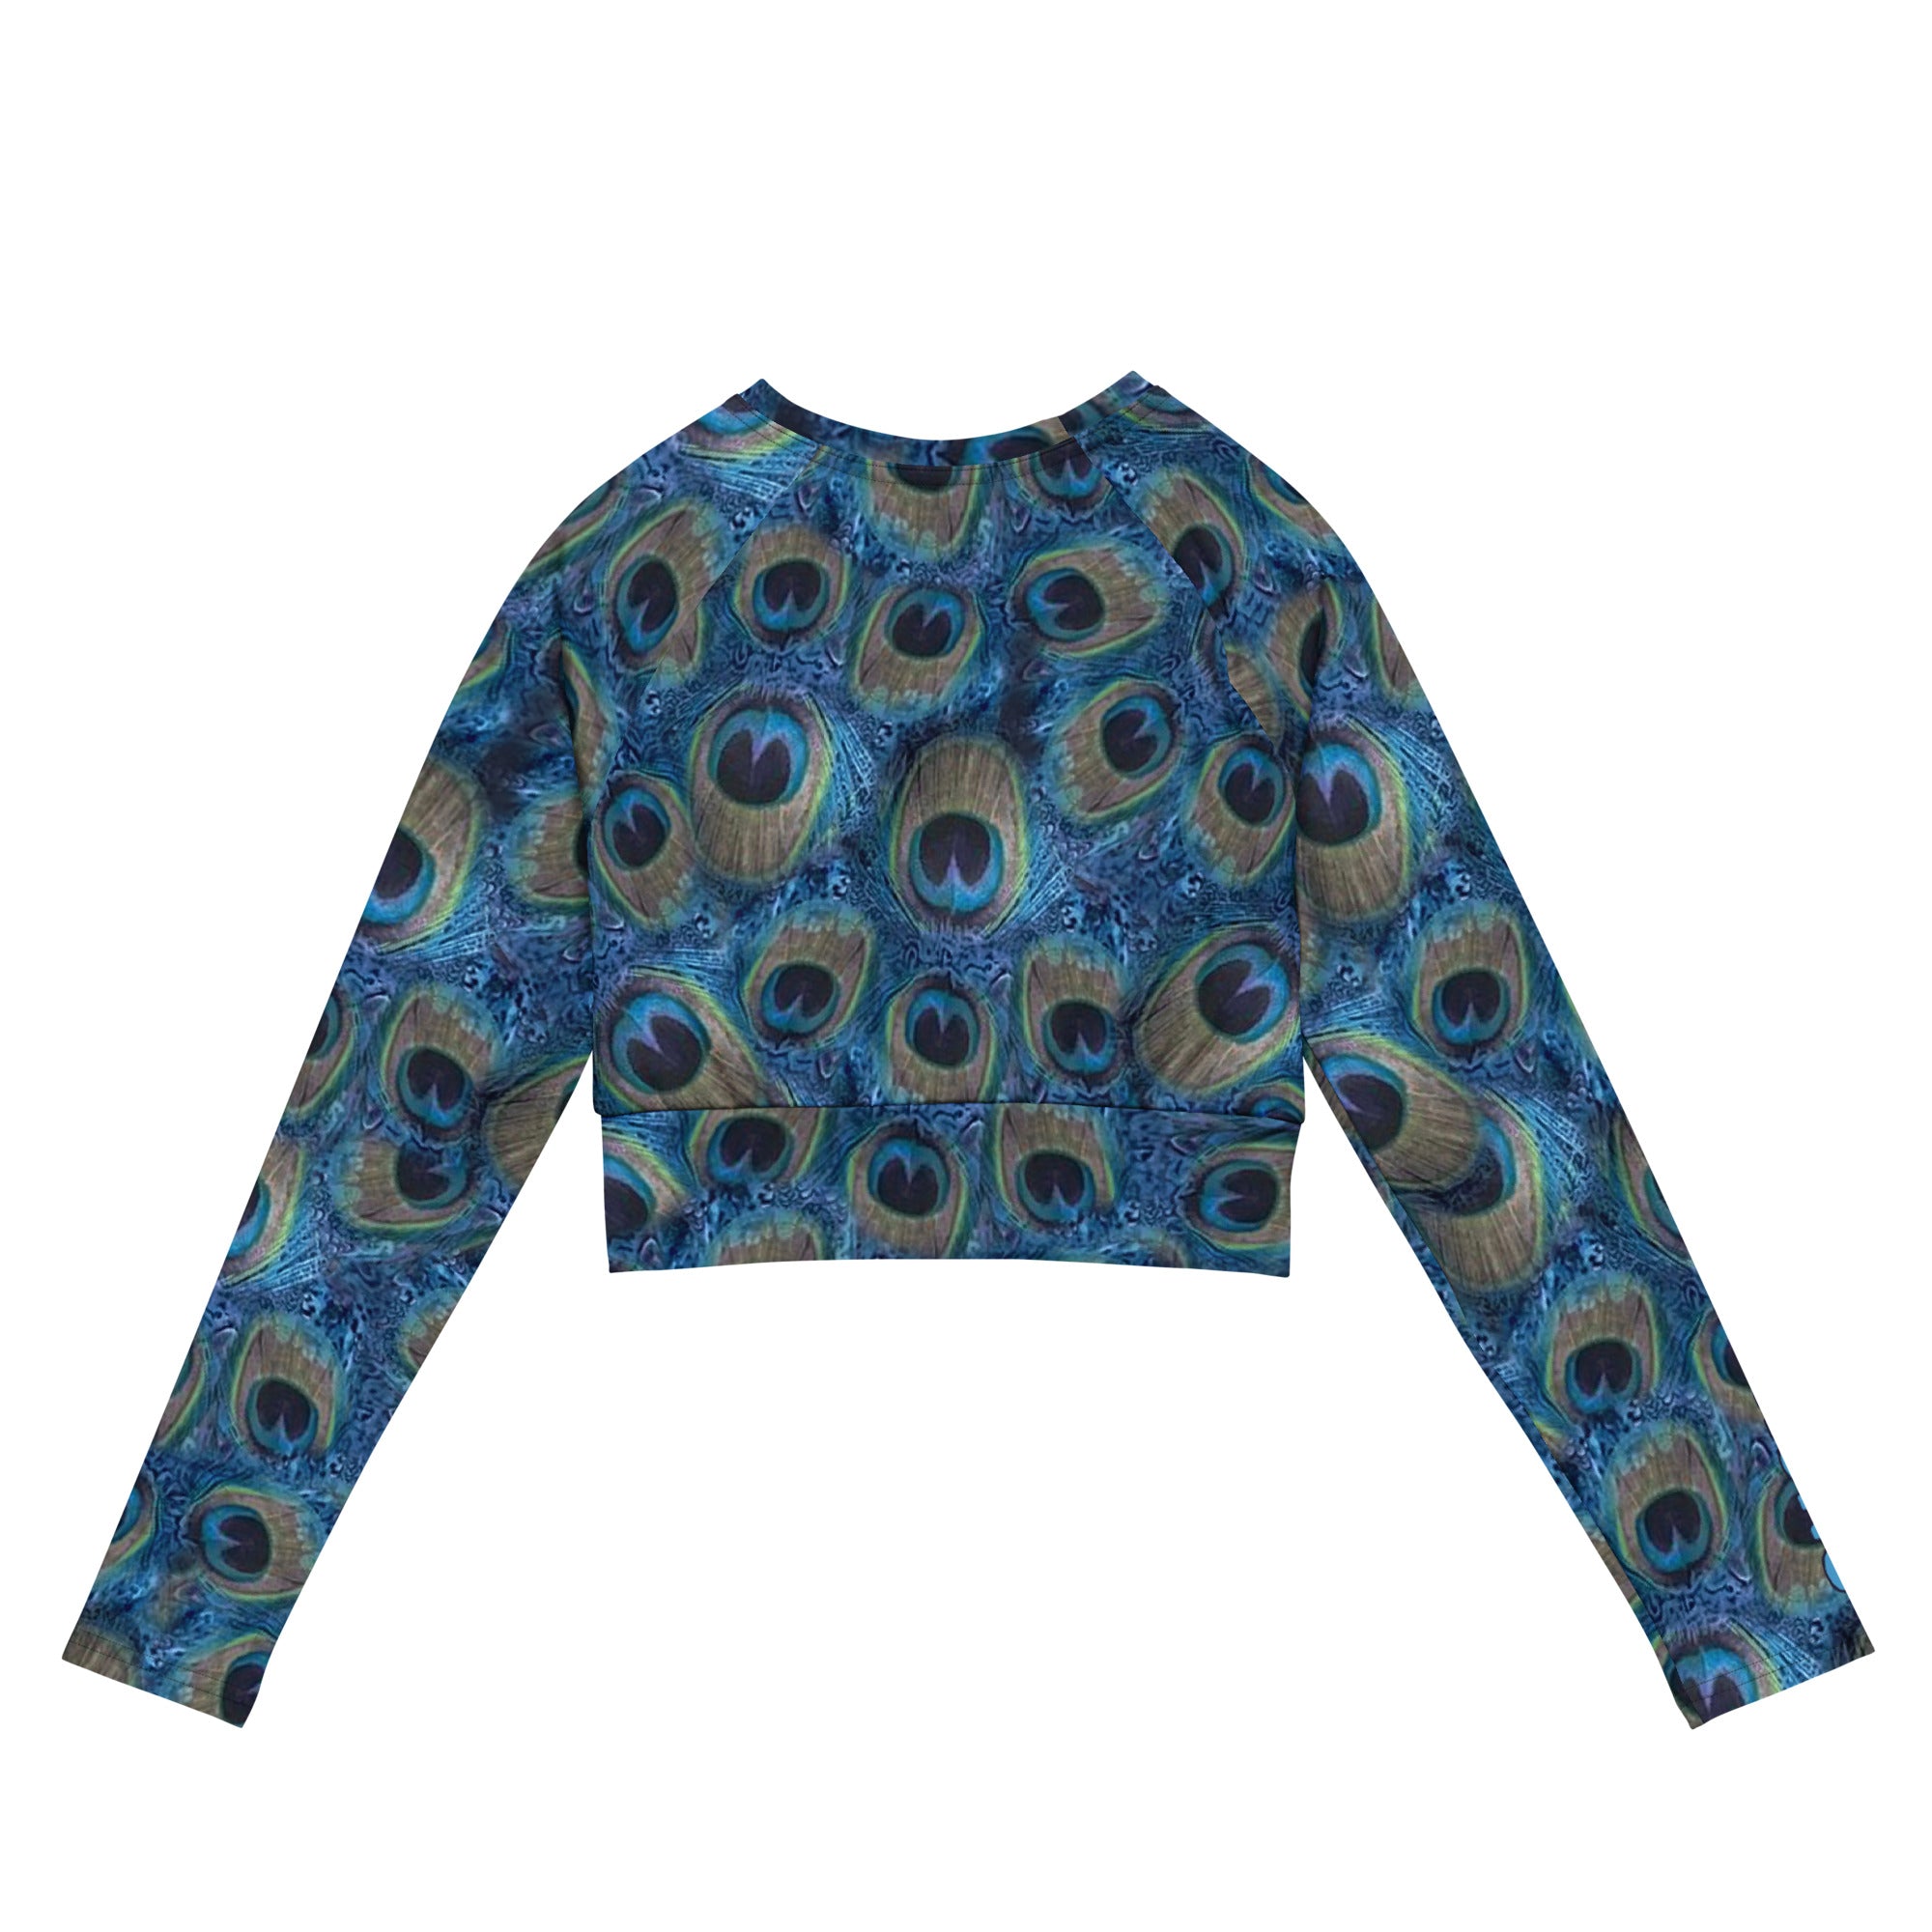 THE ESSENTIAL LONG SLEEVE FITTED PEACOCK CROP TOP